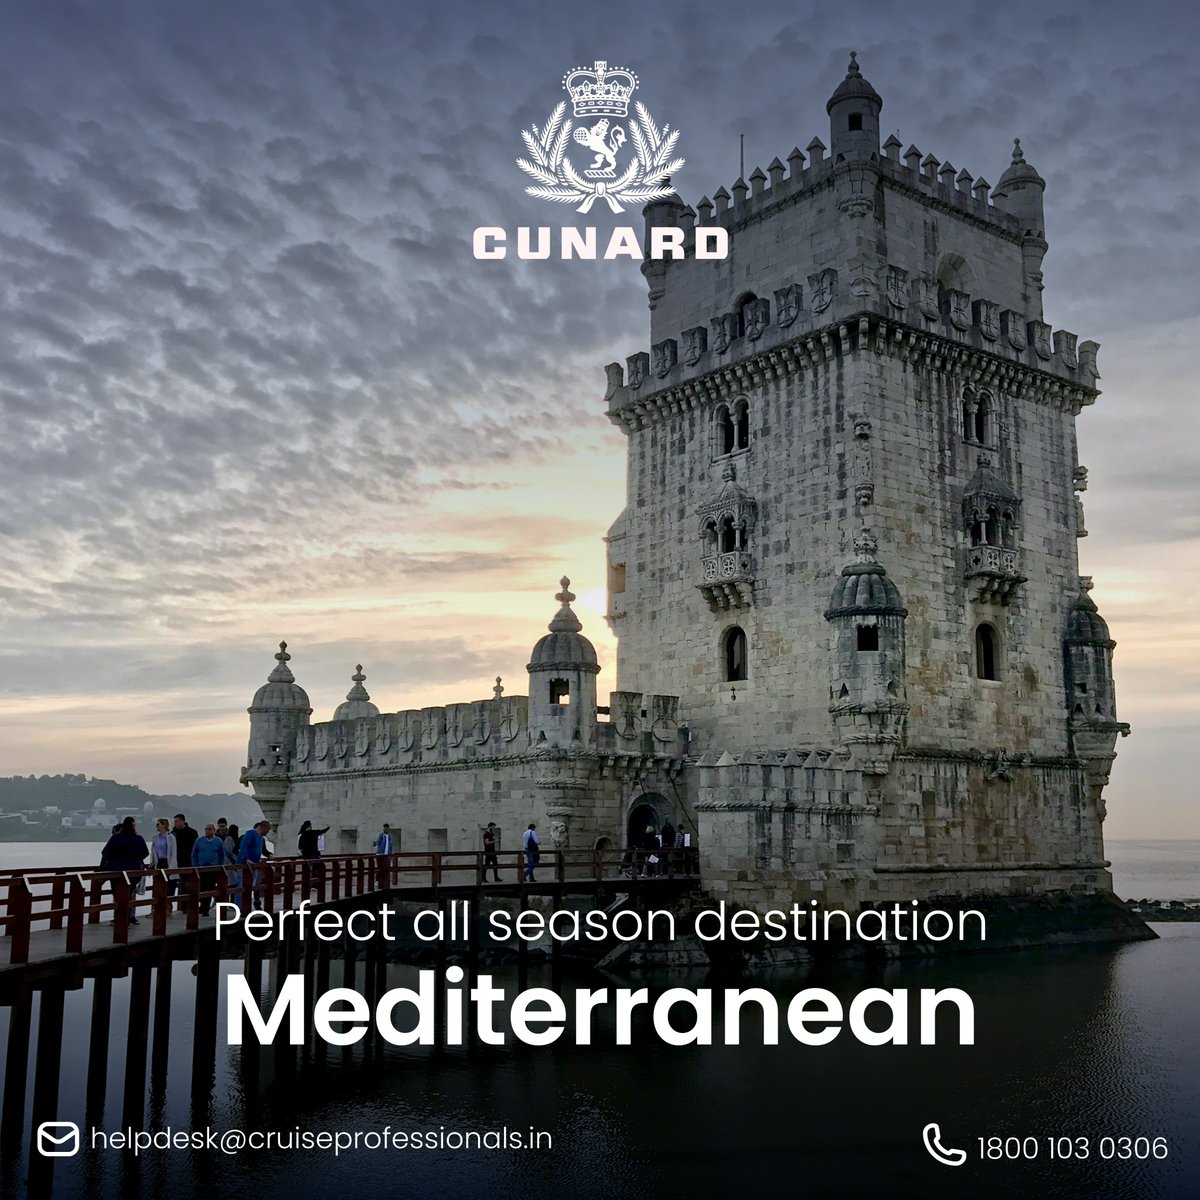 The Mediterranean is the perfect all-seasons destination, sure to inspire, delight and captivate. Explore this vibrant destination with Cunard. 

#cunard #cruiseprofessionals #queenvictoria #cruising #luxury #icon #cruisevacation #luxurytravels #cruiseship #queenanne #QM2